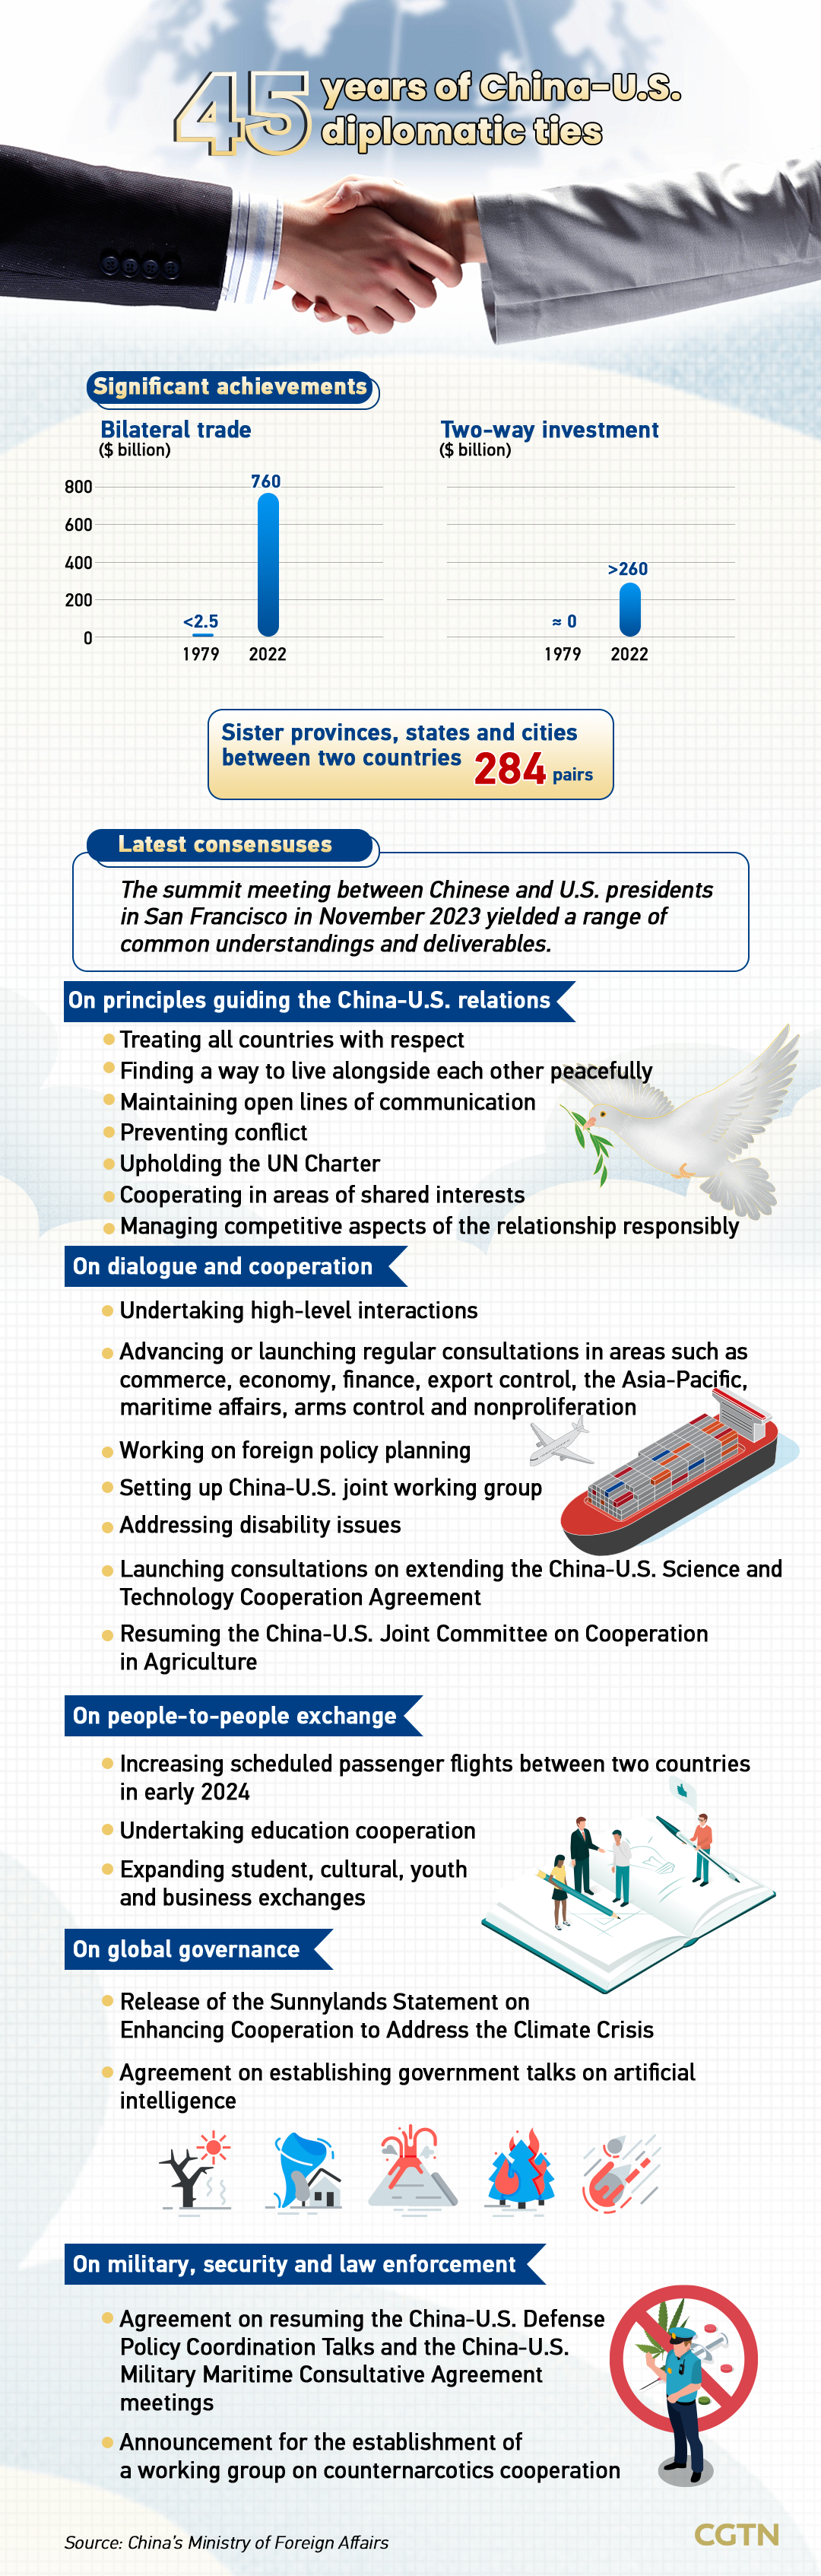 Graphics: Exploring new opportunities in China-U.S. cooperation